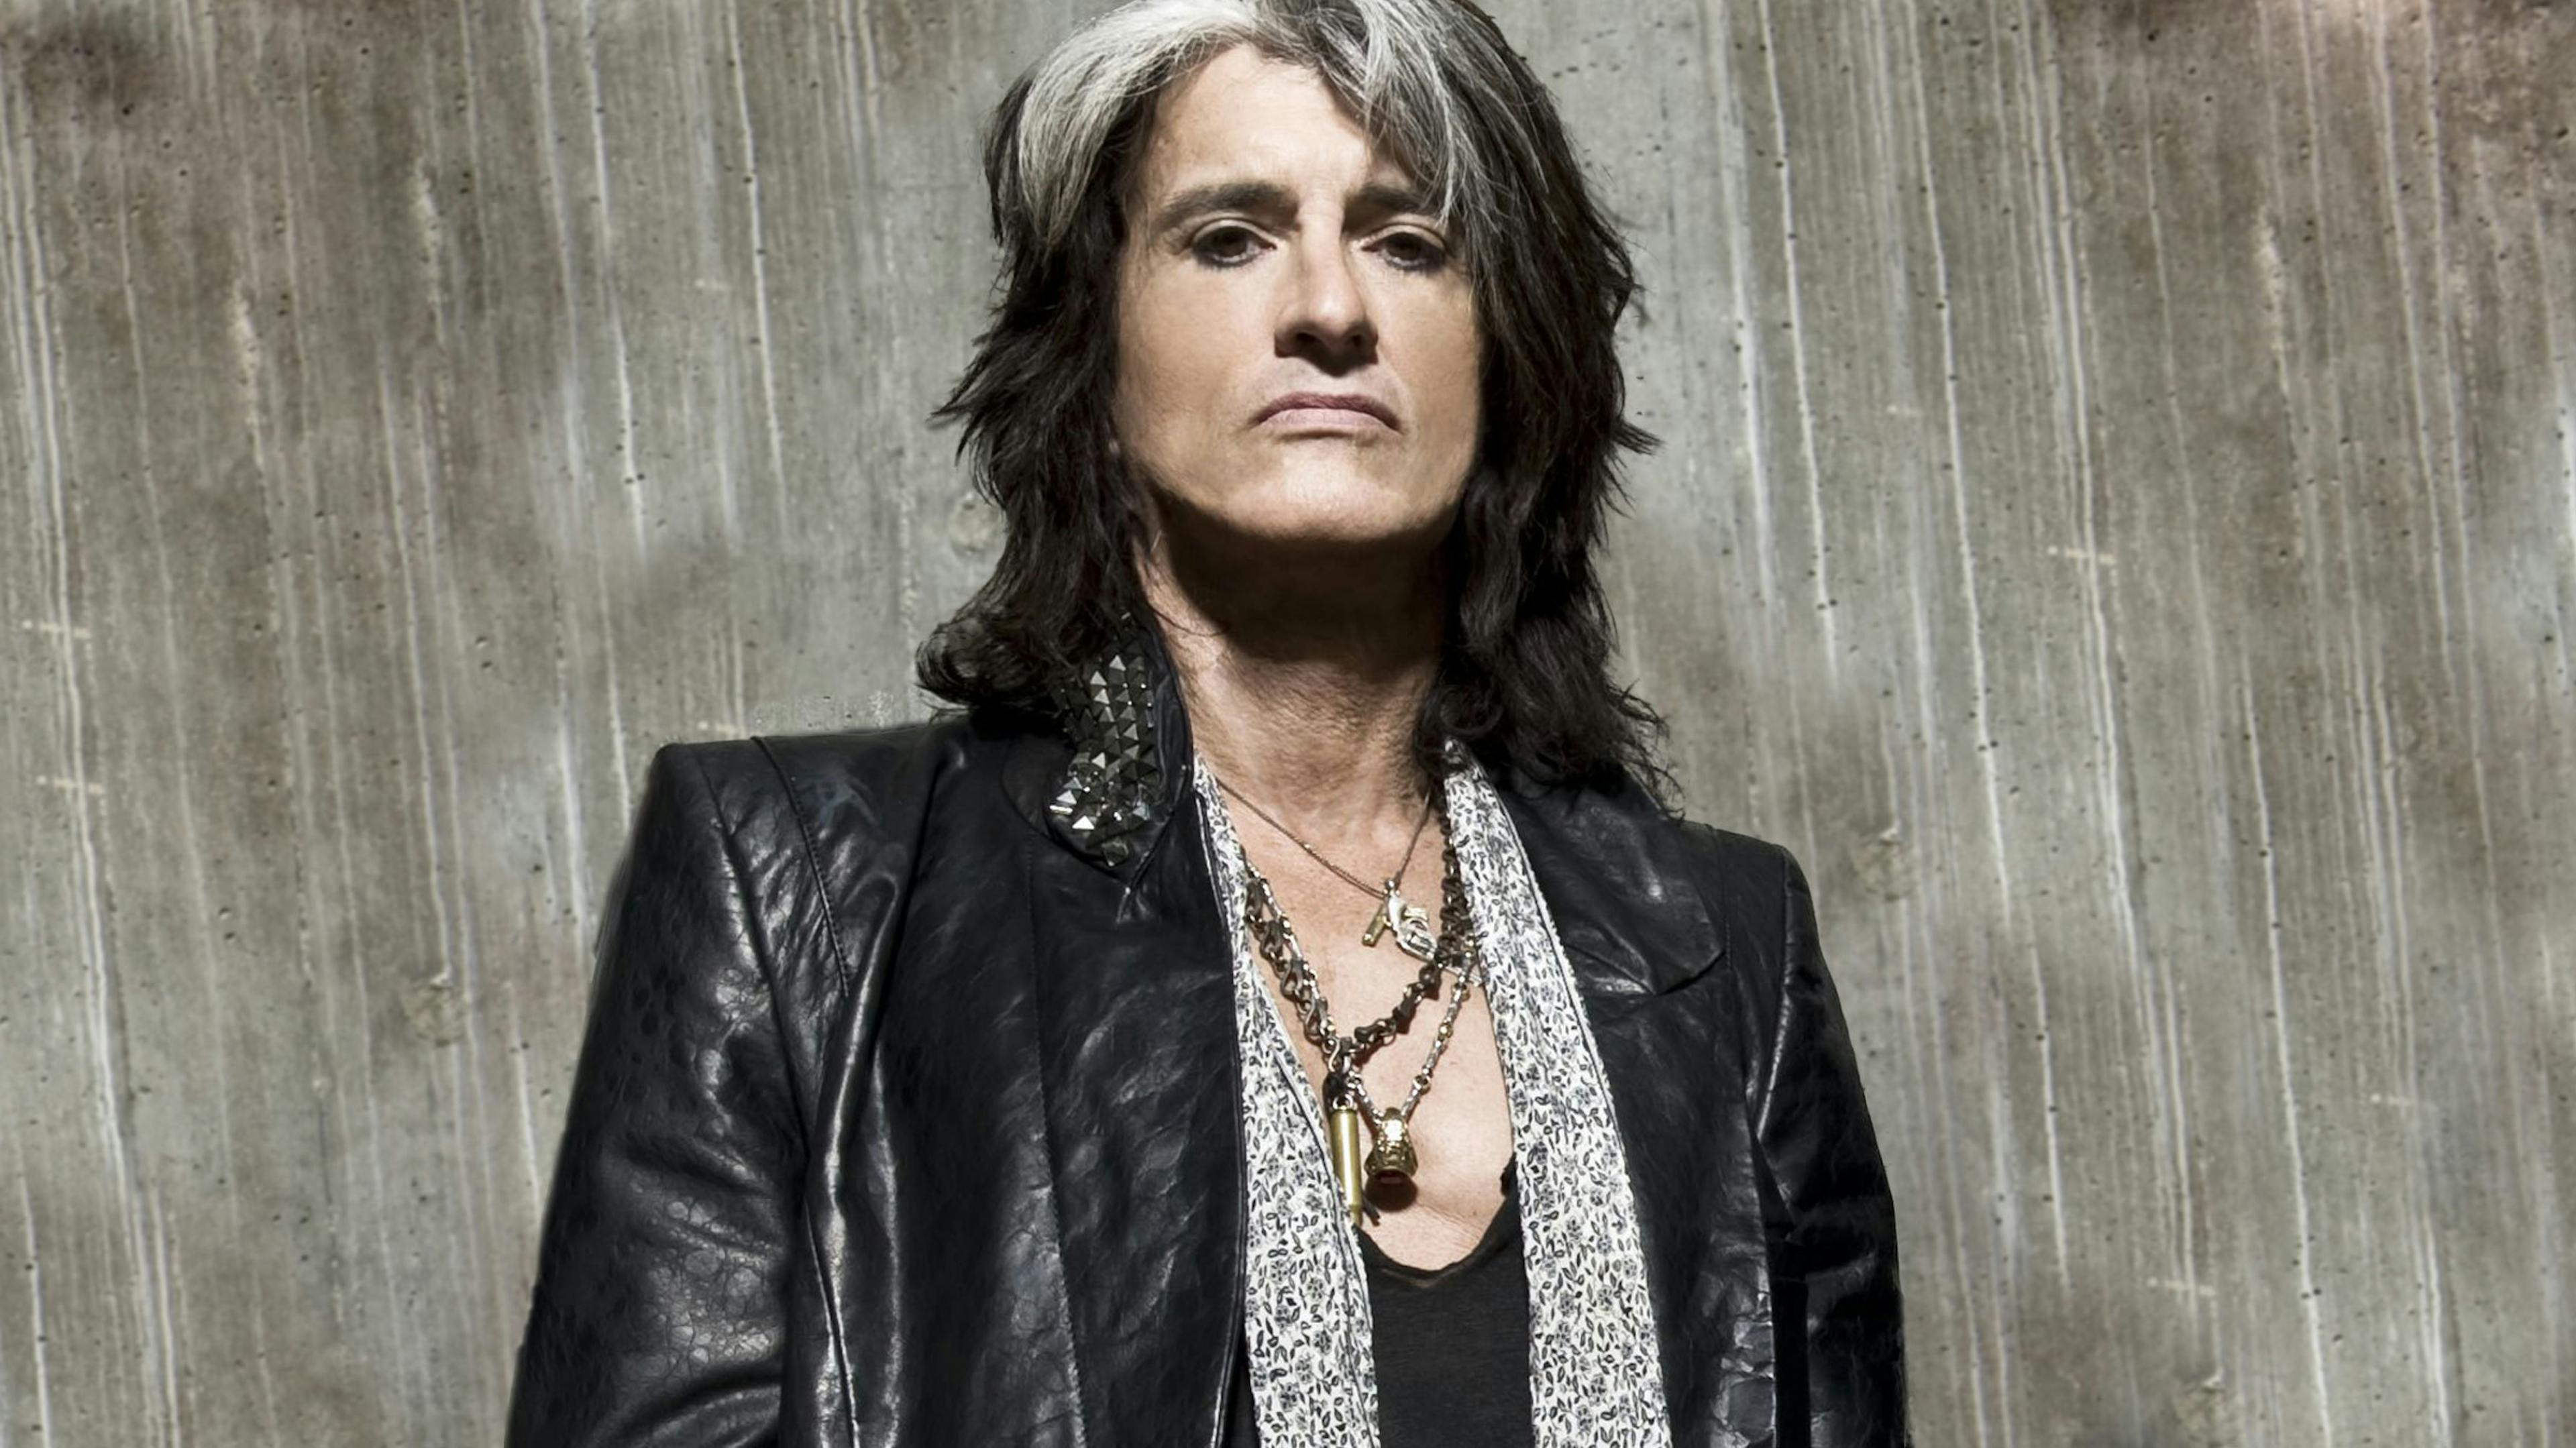 Joe Perry: “Aerosmith are well endowed with fighting spirit. We still go out thinking we have something to prove”